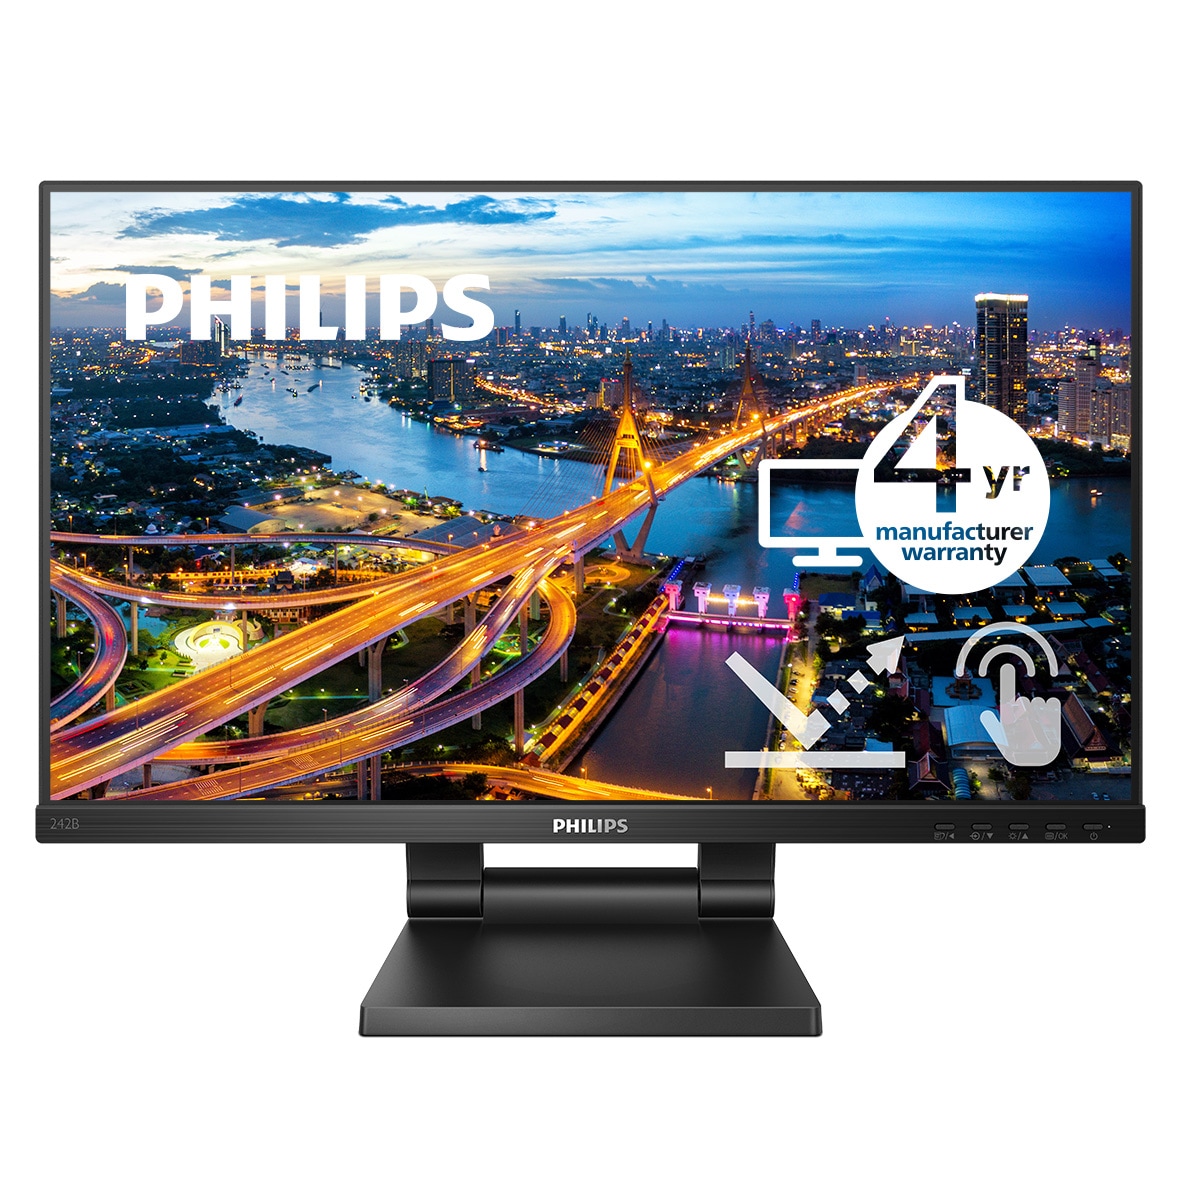 PHILIPS 242B1TC - 24" Touch Monitor, LED, FHD (1920x1080), VGA, DP, HDMI, 4 Year Manufacturer Warranty